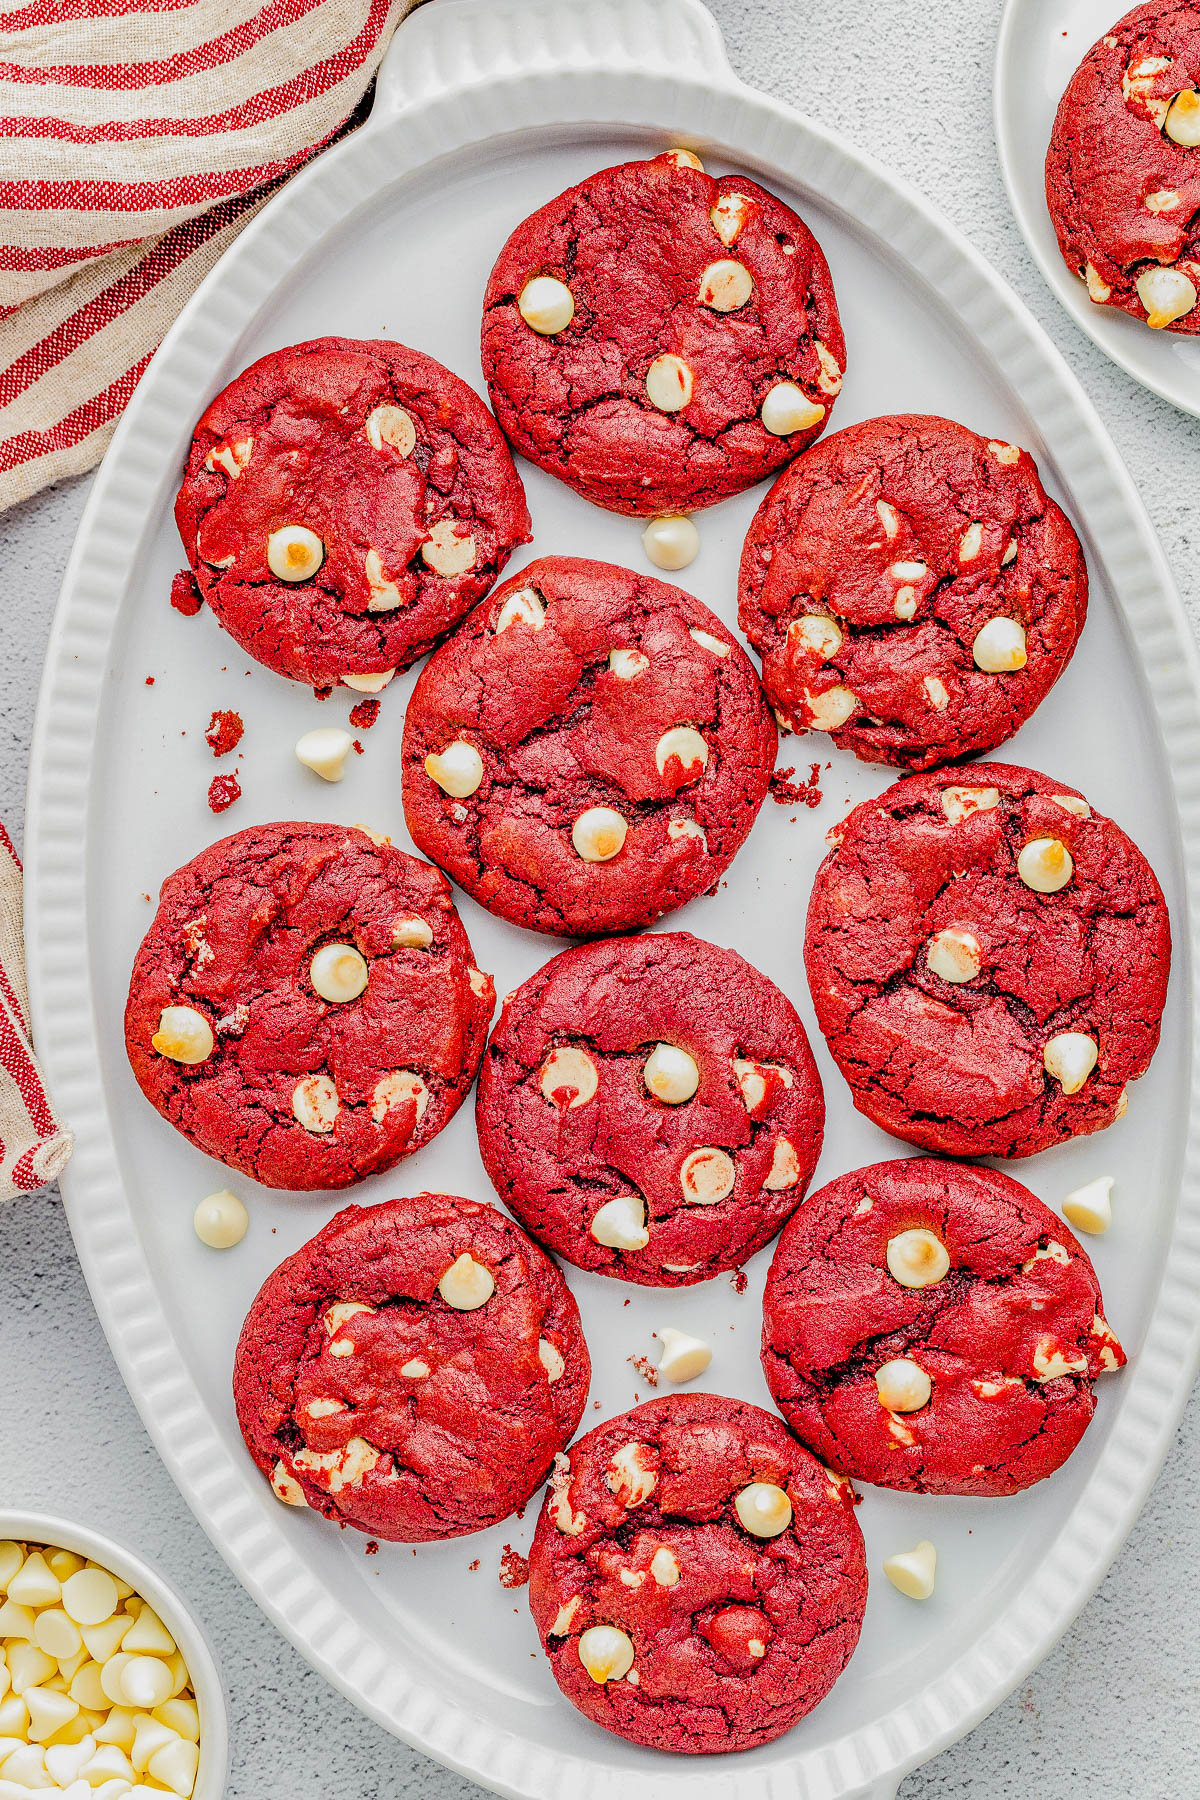 Red Velvet Cookies — Soft and chewy red velvet cookies that are loaded with white chocolate chips in every bite! A classic from-scratch red velvet cookie recipe that’s made in one bowl and EASY to make with PERFECT results every time! Perfect for Valentine’s Day, Christmas, or anytime you’re craving red velvet because these come together in no time and everyone LOVES them! 